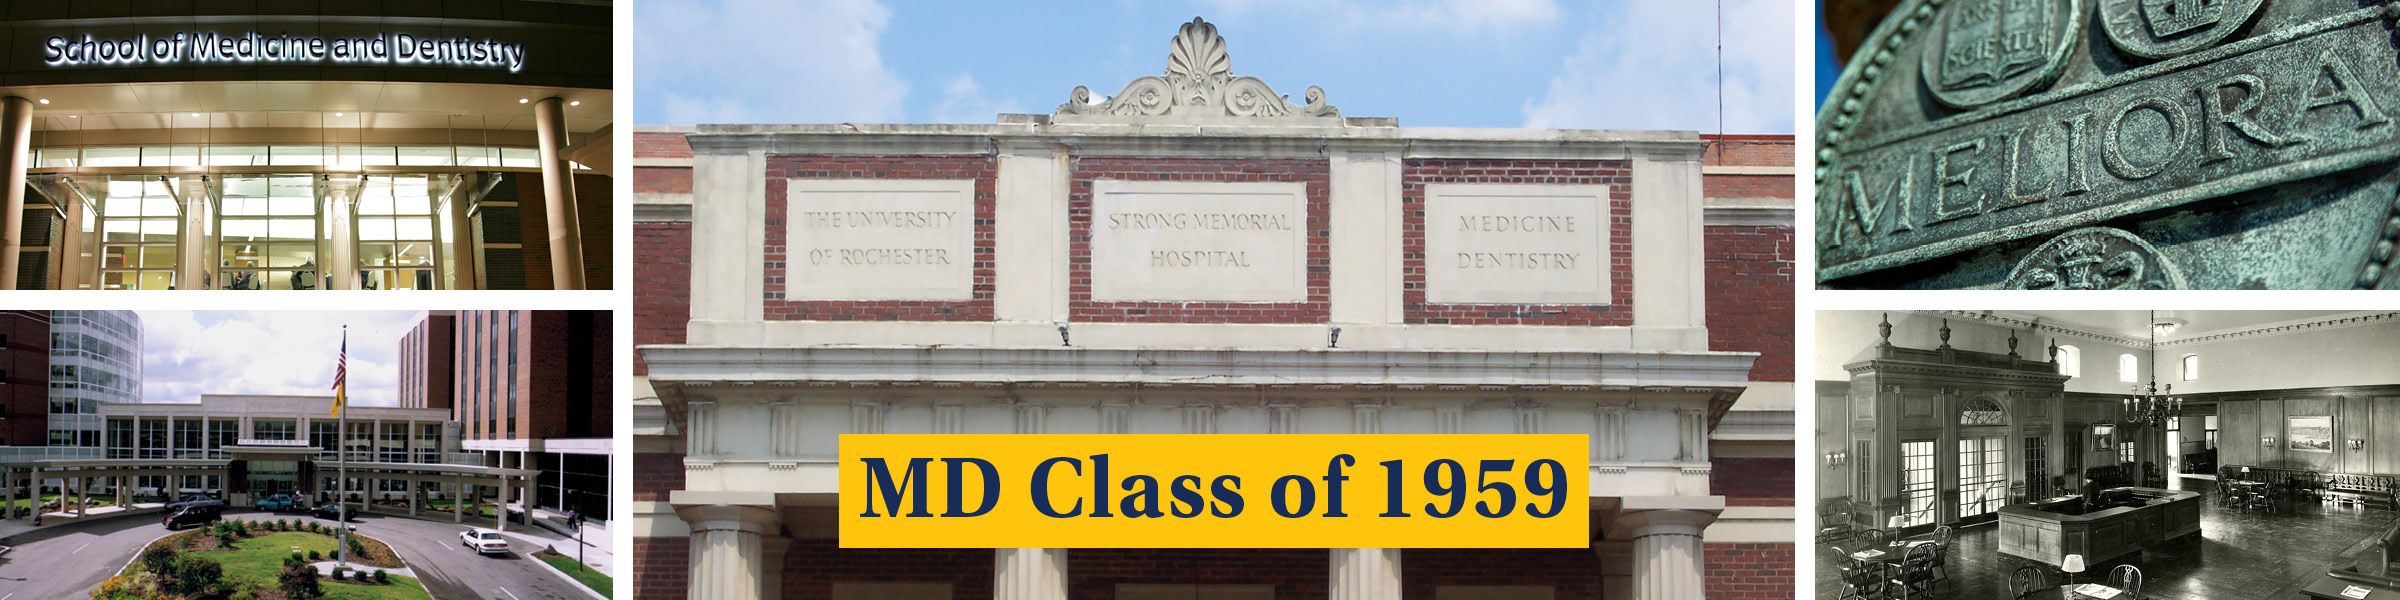 UR SMD Class of 1959